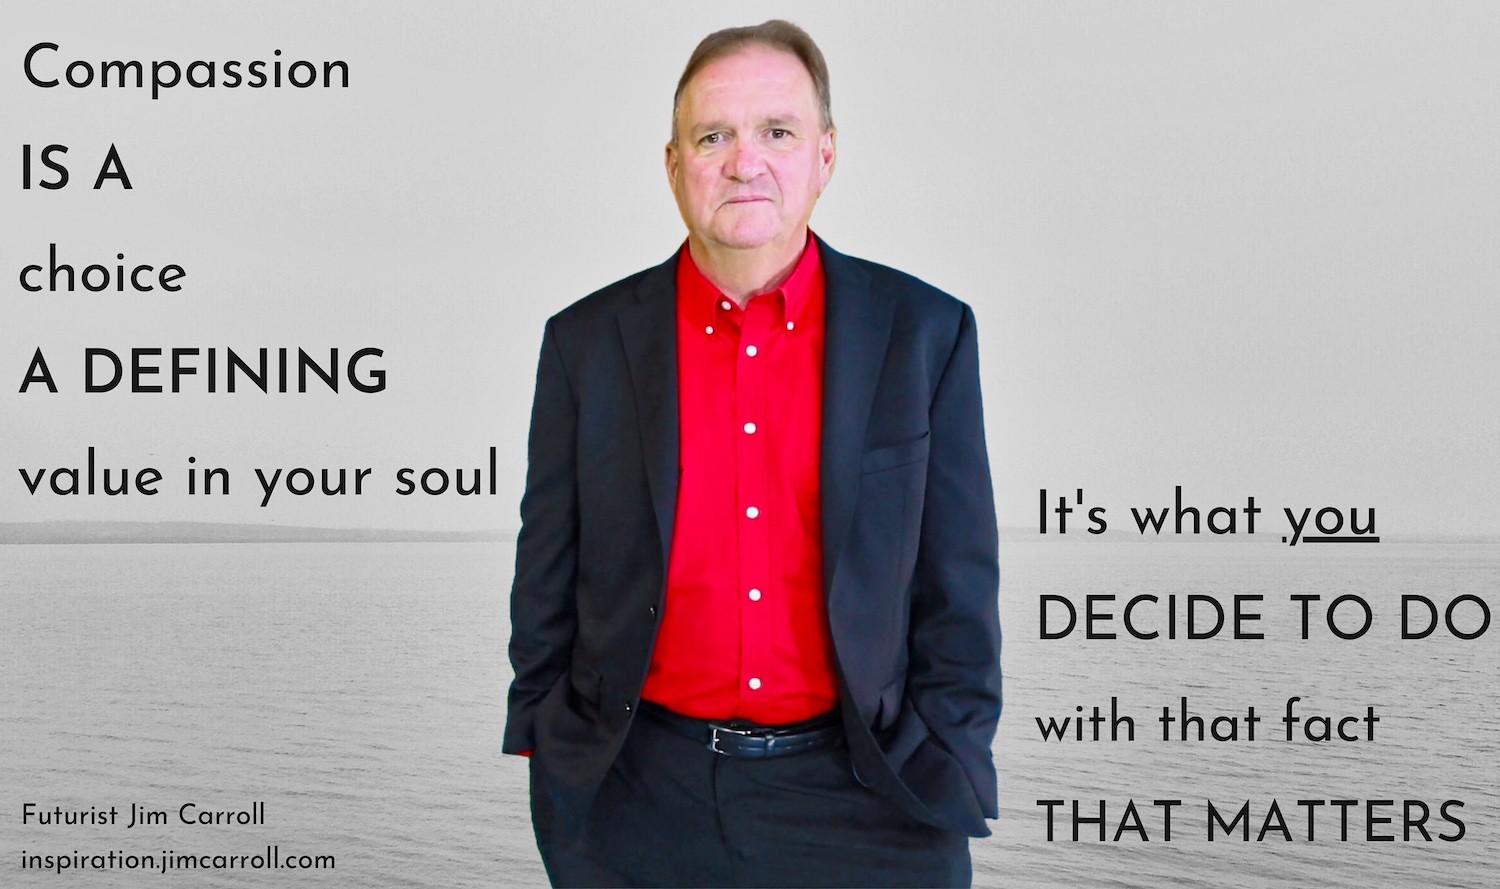 "Compassion is a choice, a defining value in your soul. It's what you decide to do with that fact that matters!" - Futurist Jim Carroll